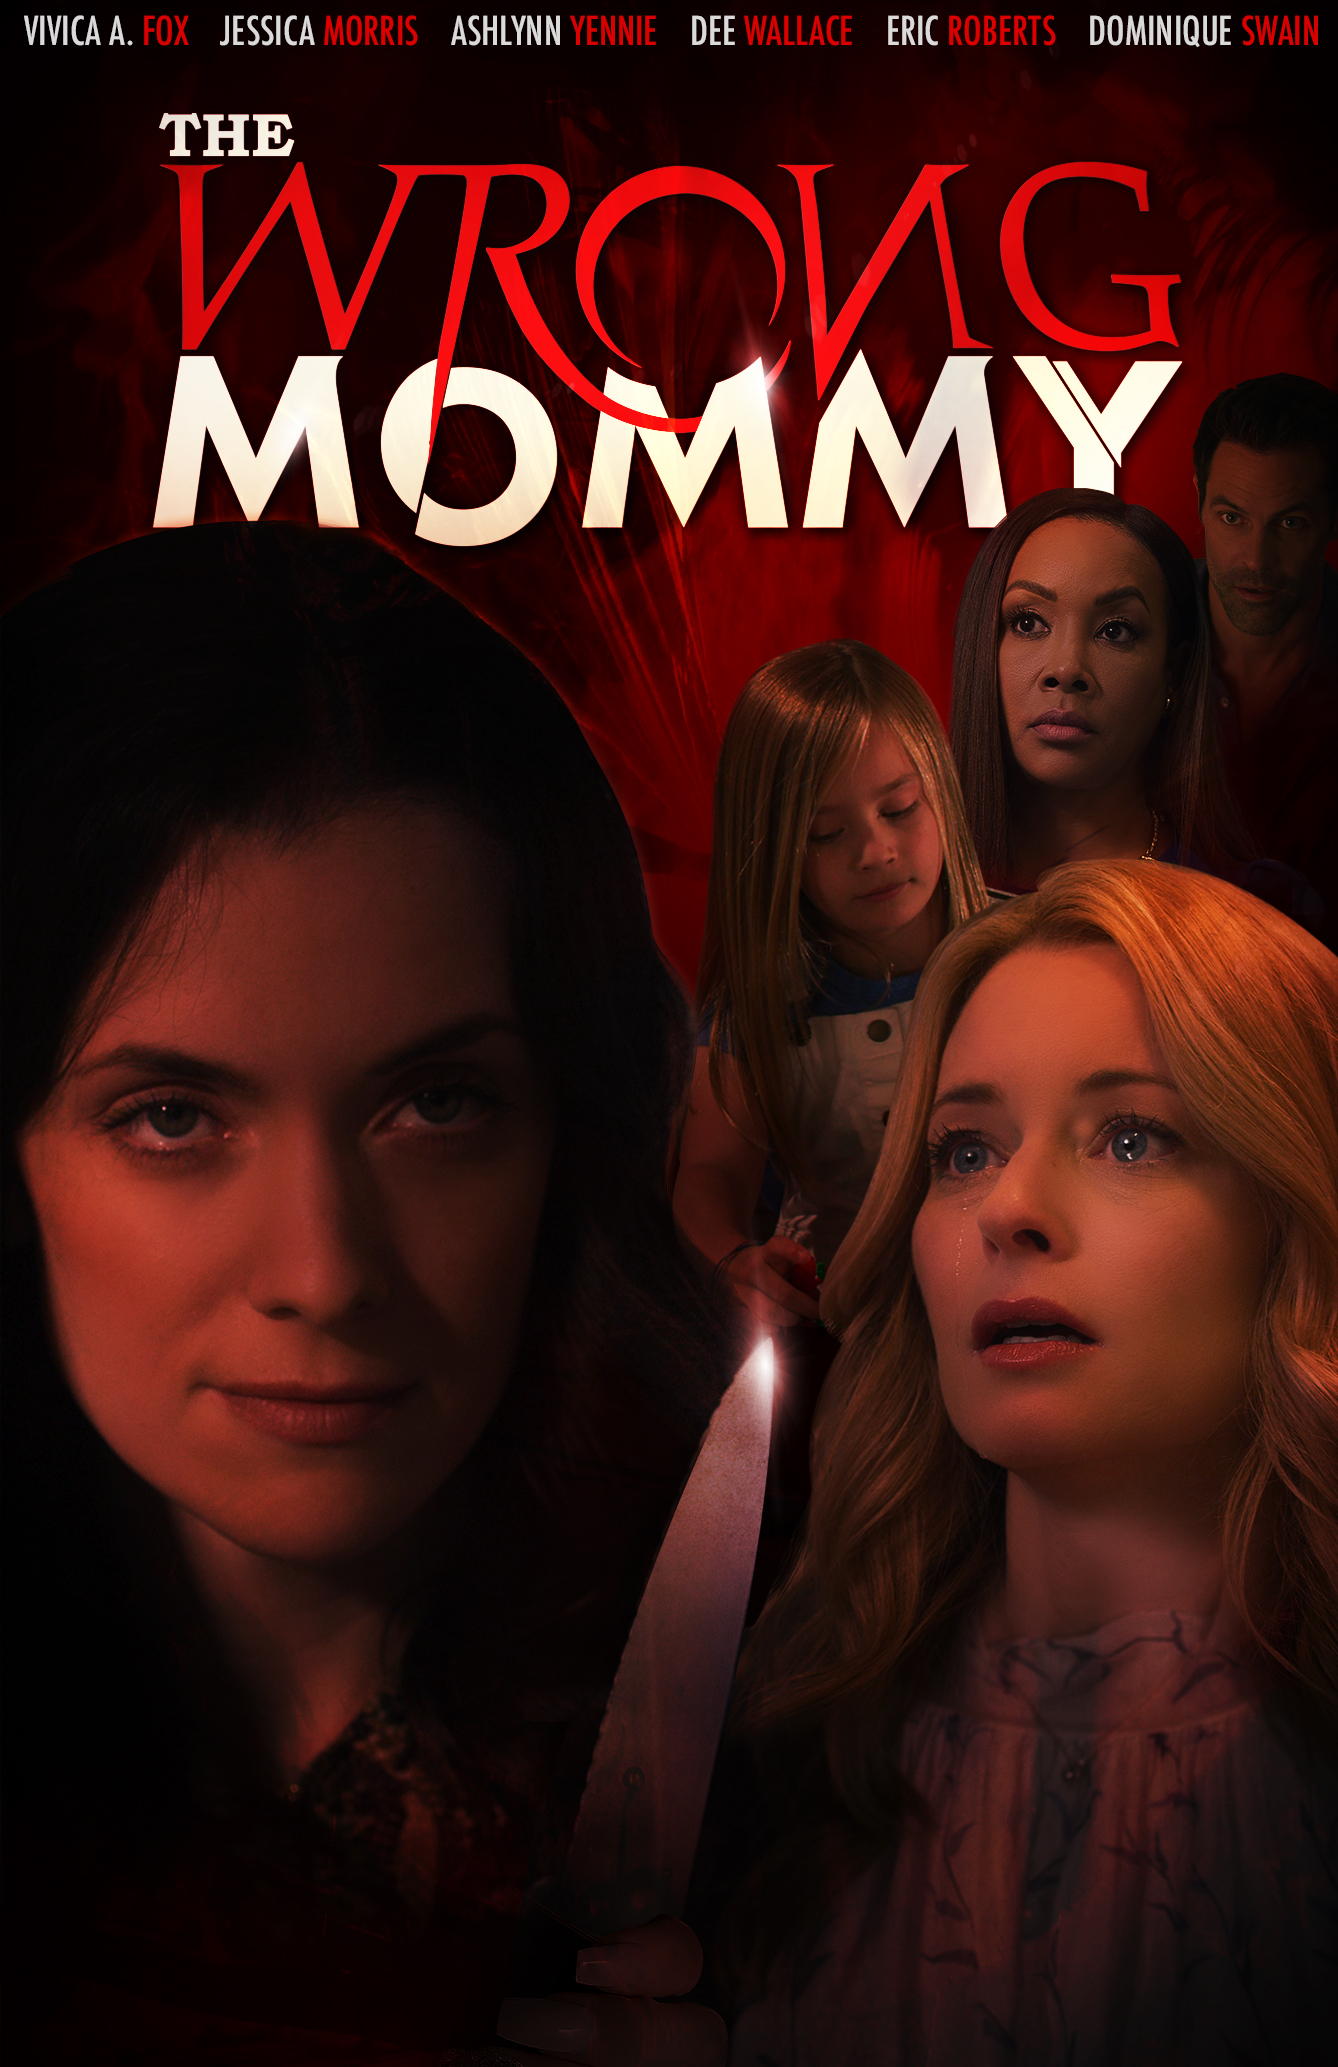 The Wrong Mommy (2019) Screenshot 1 